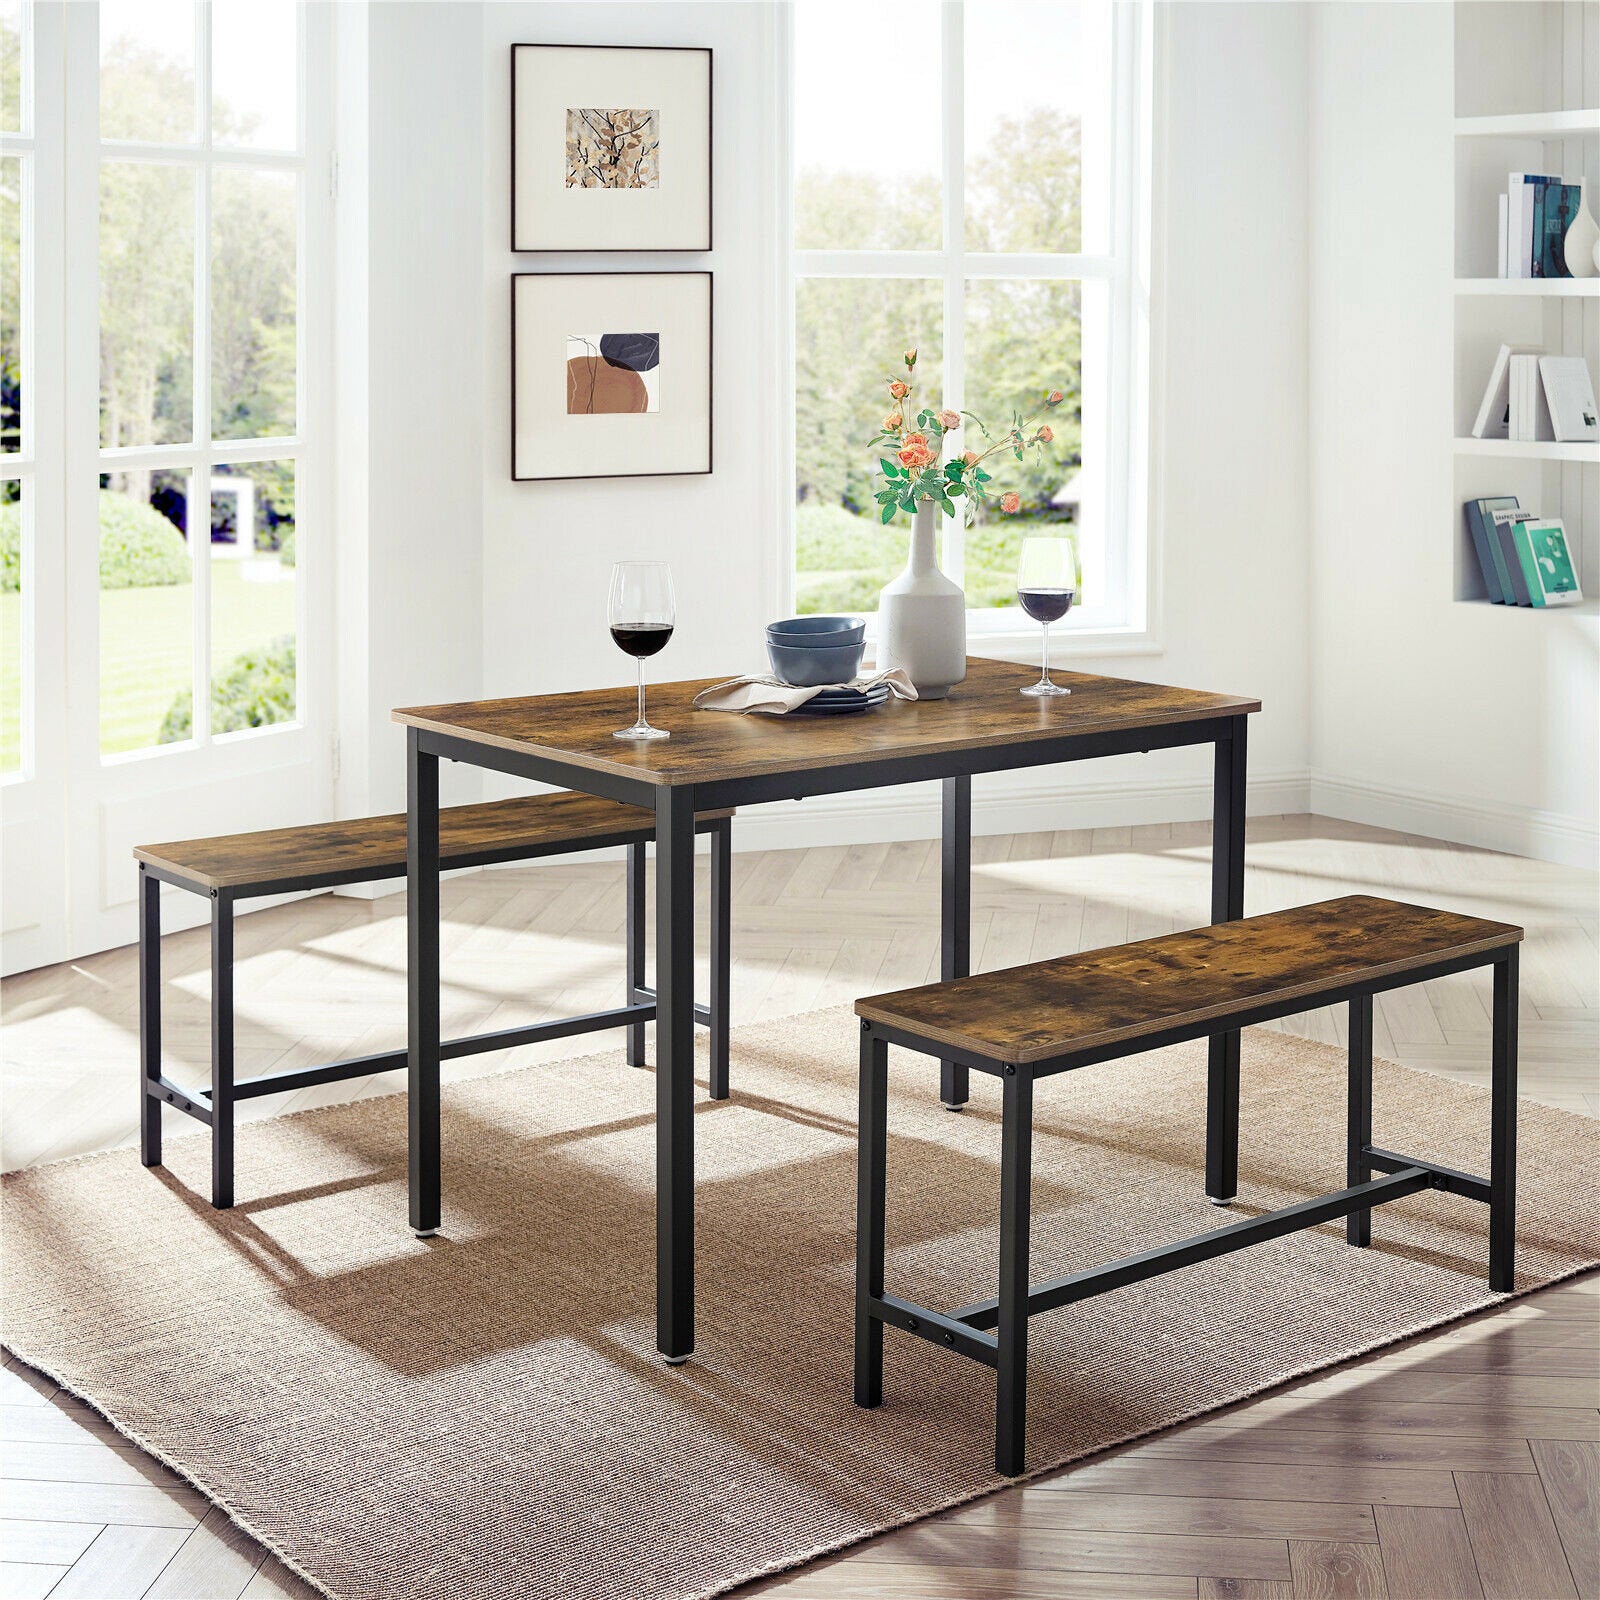 Rena Rustic Dining Table and Bench Set